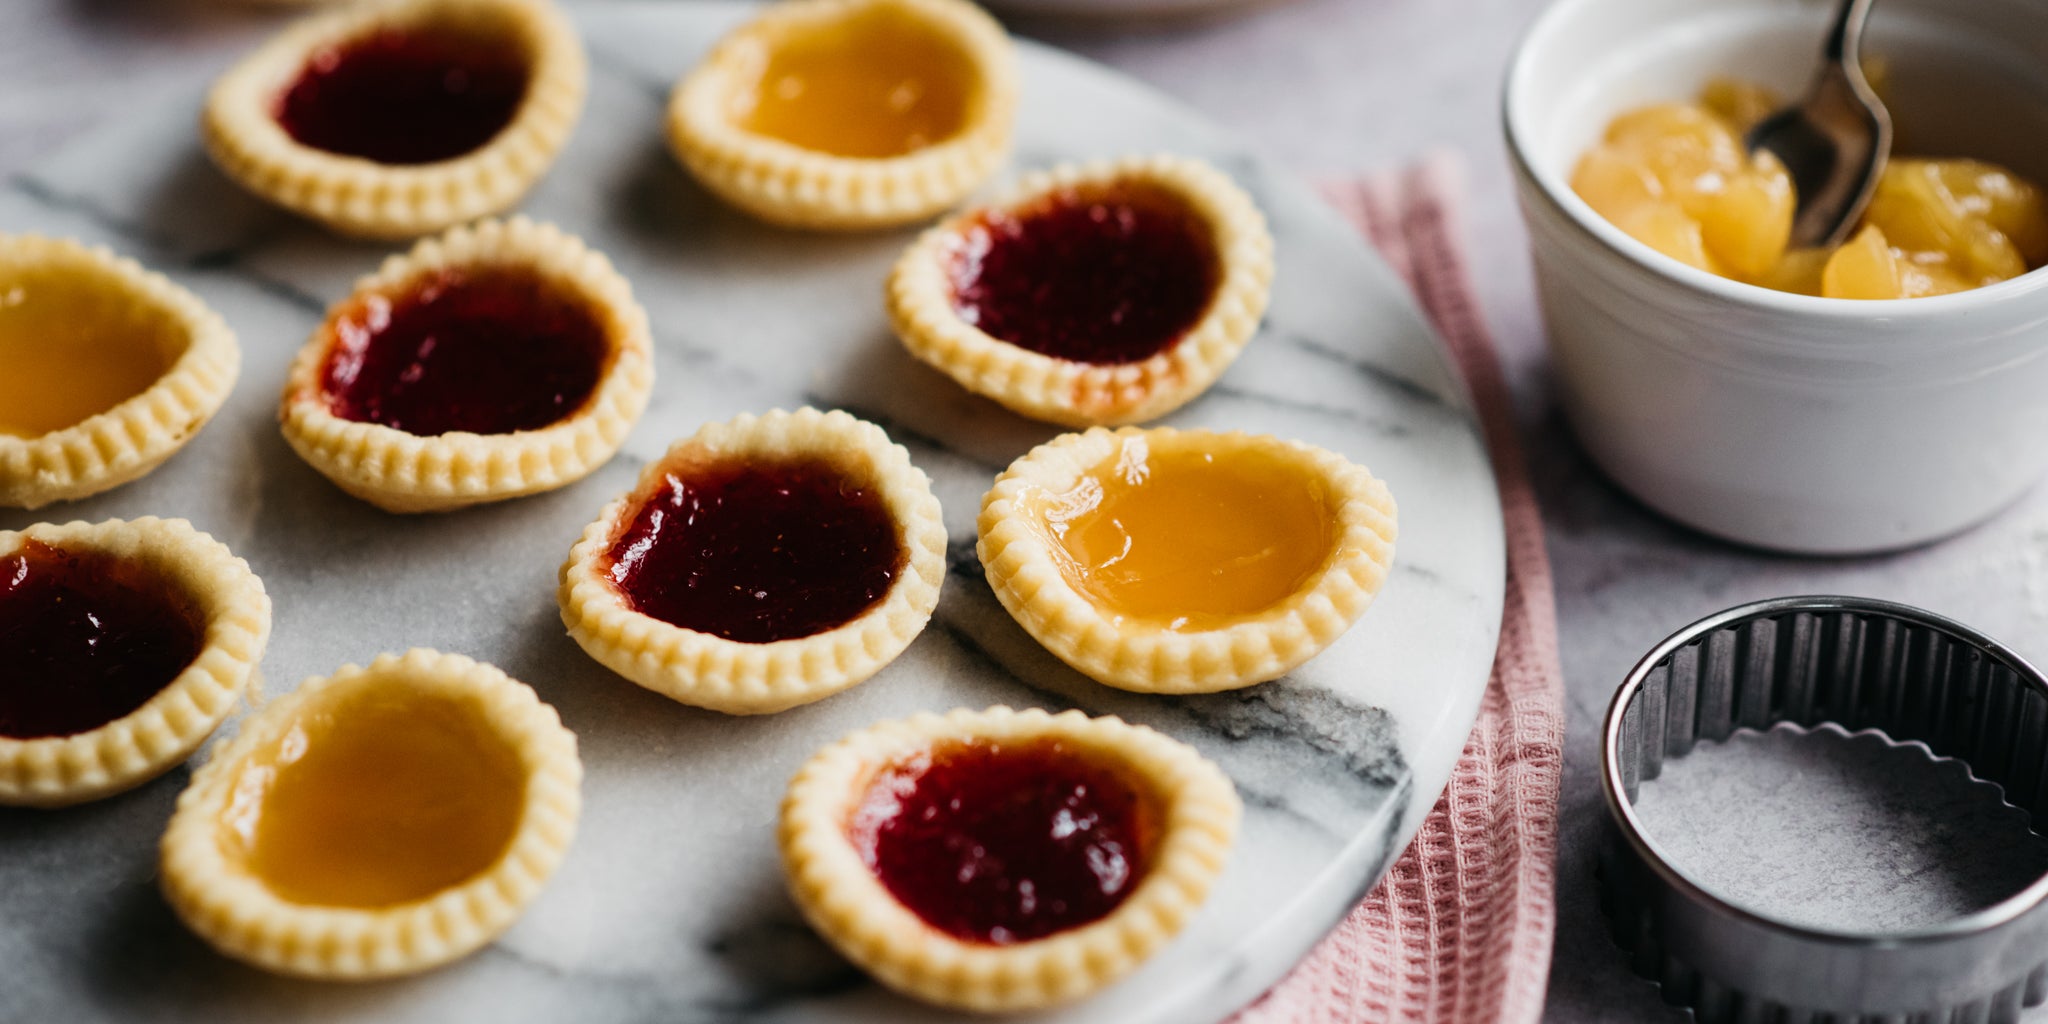 Close-up of homemade strawberry and apricot jam tarts